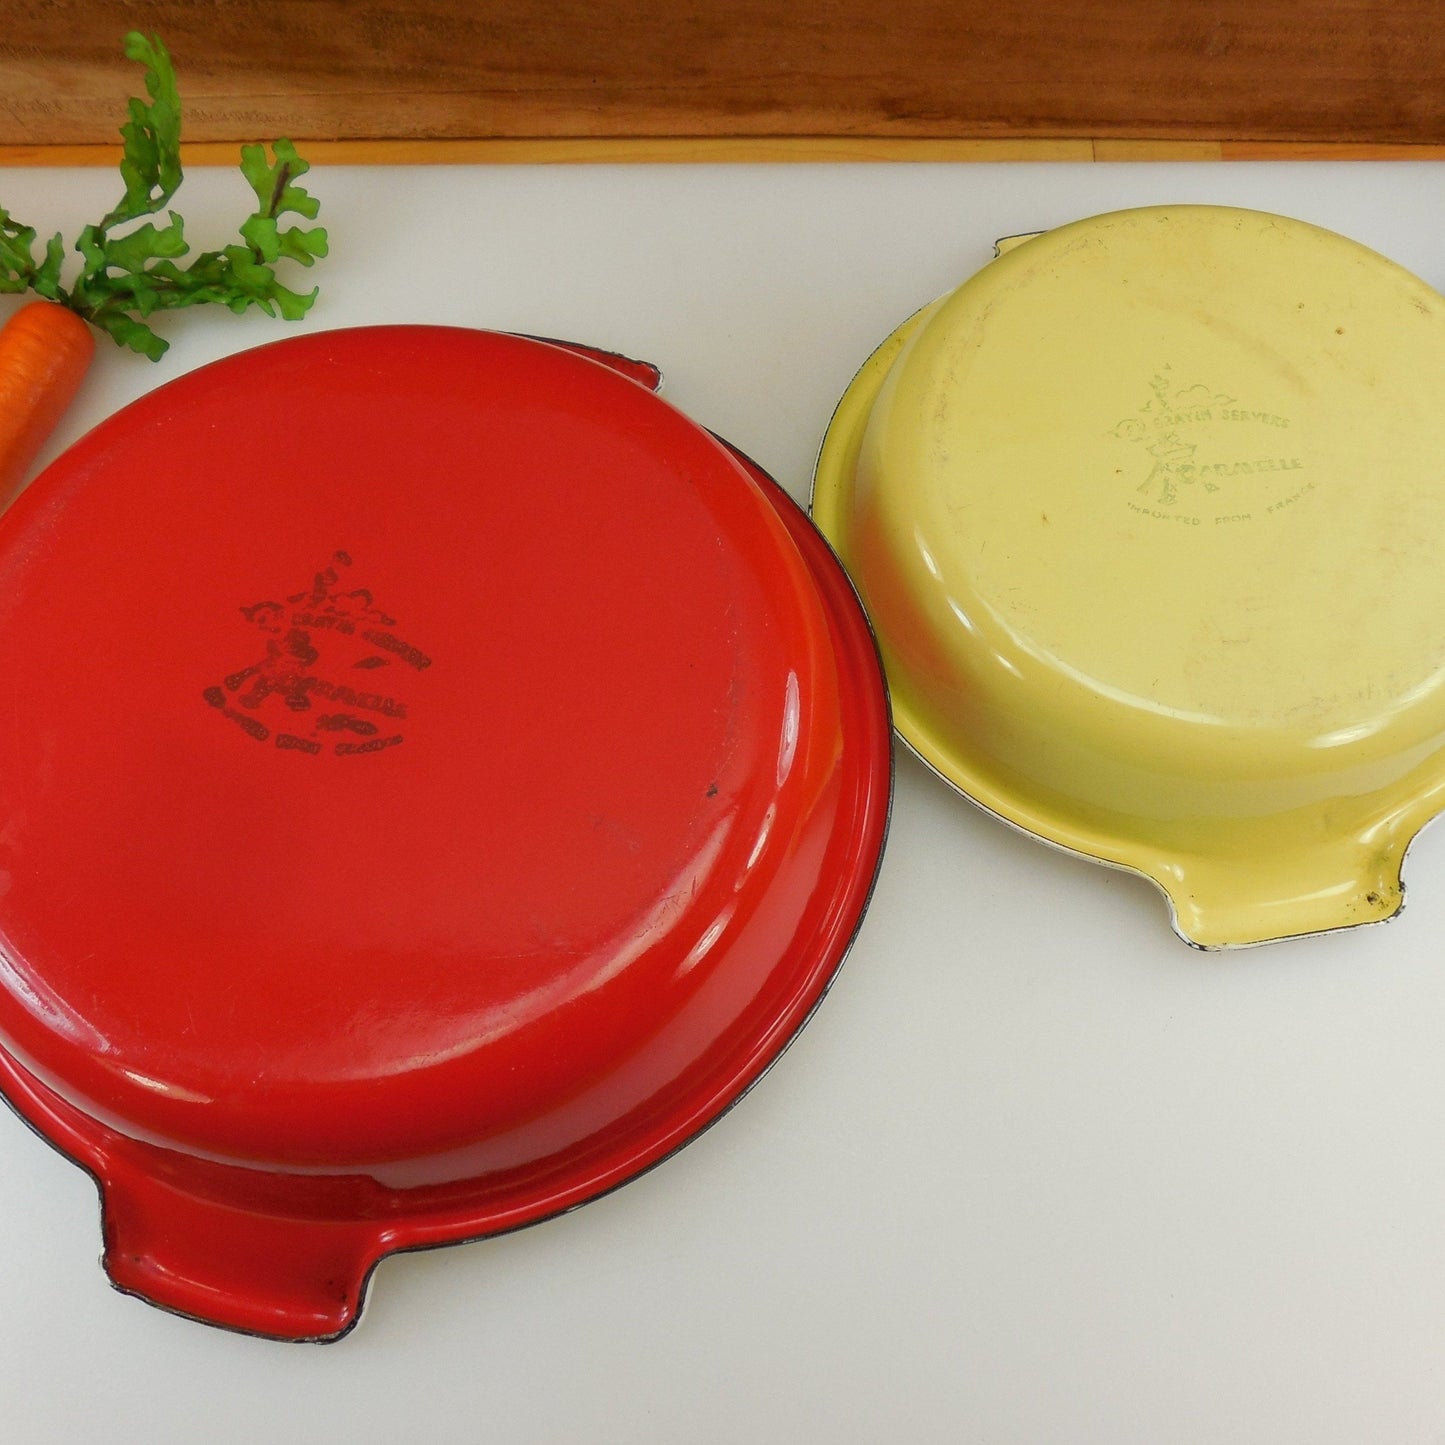 Caravelle France Gratin Servers Red Yellow Enamelware - Not Sizzlers Vintage used